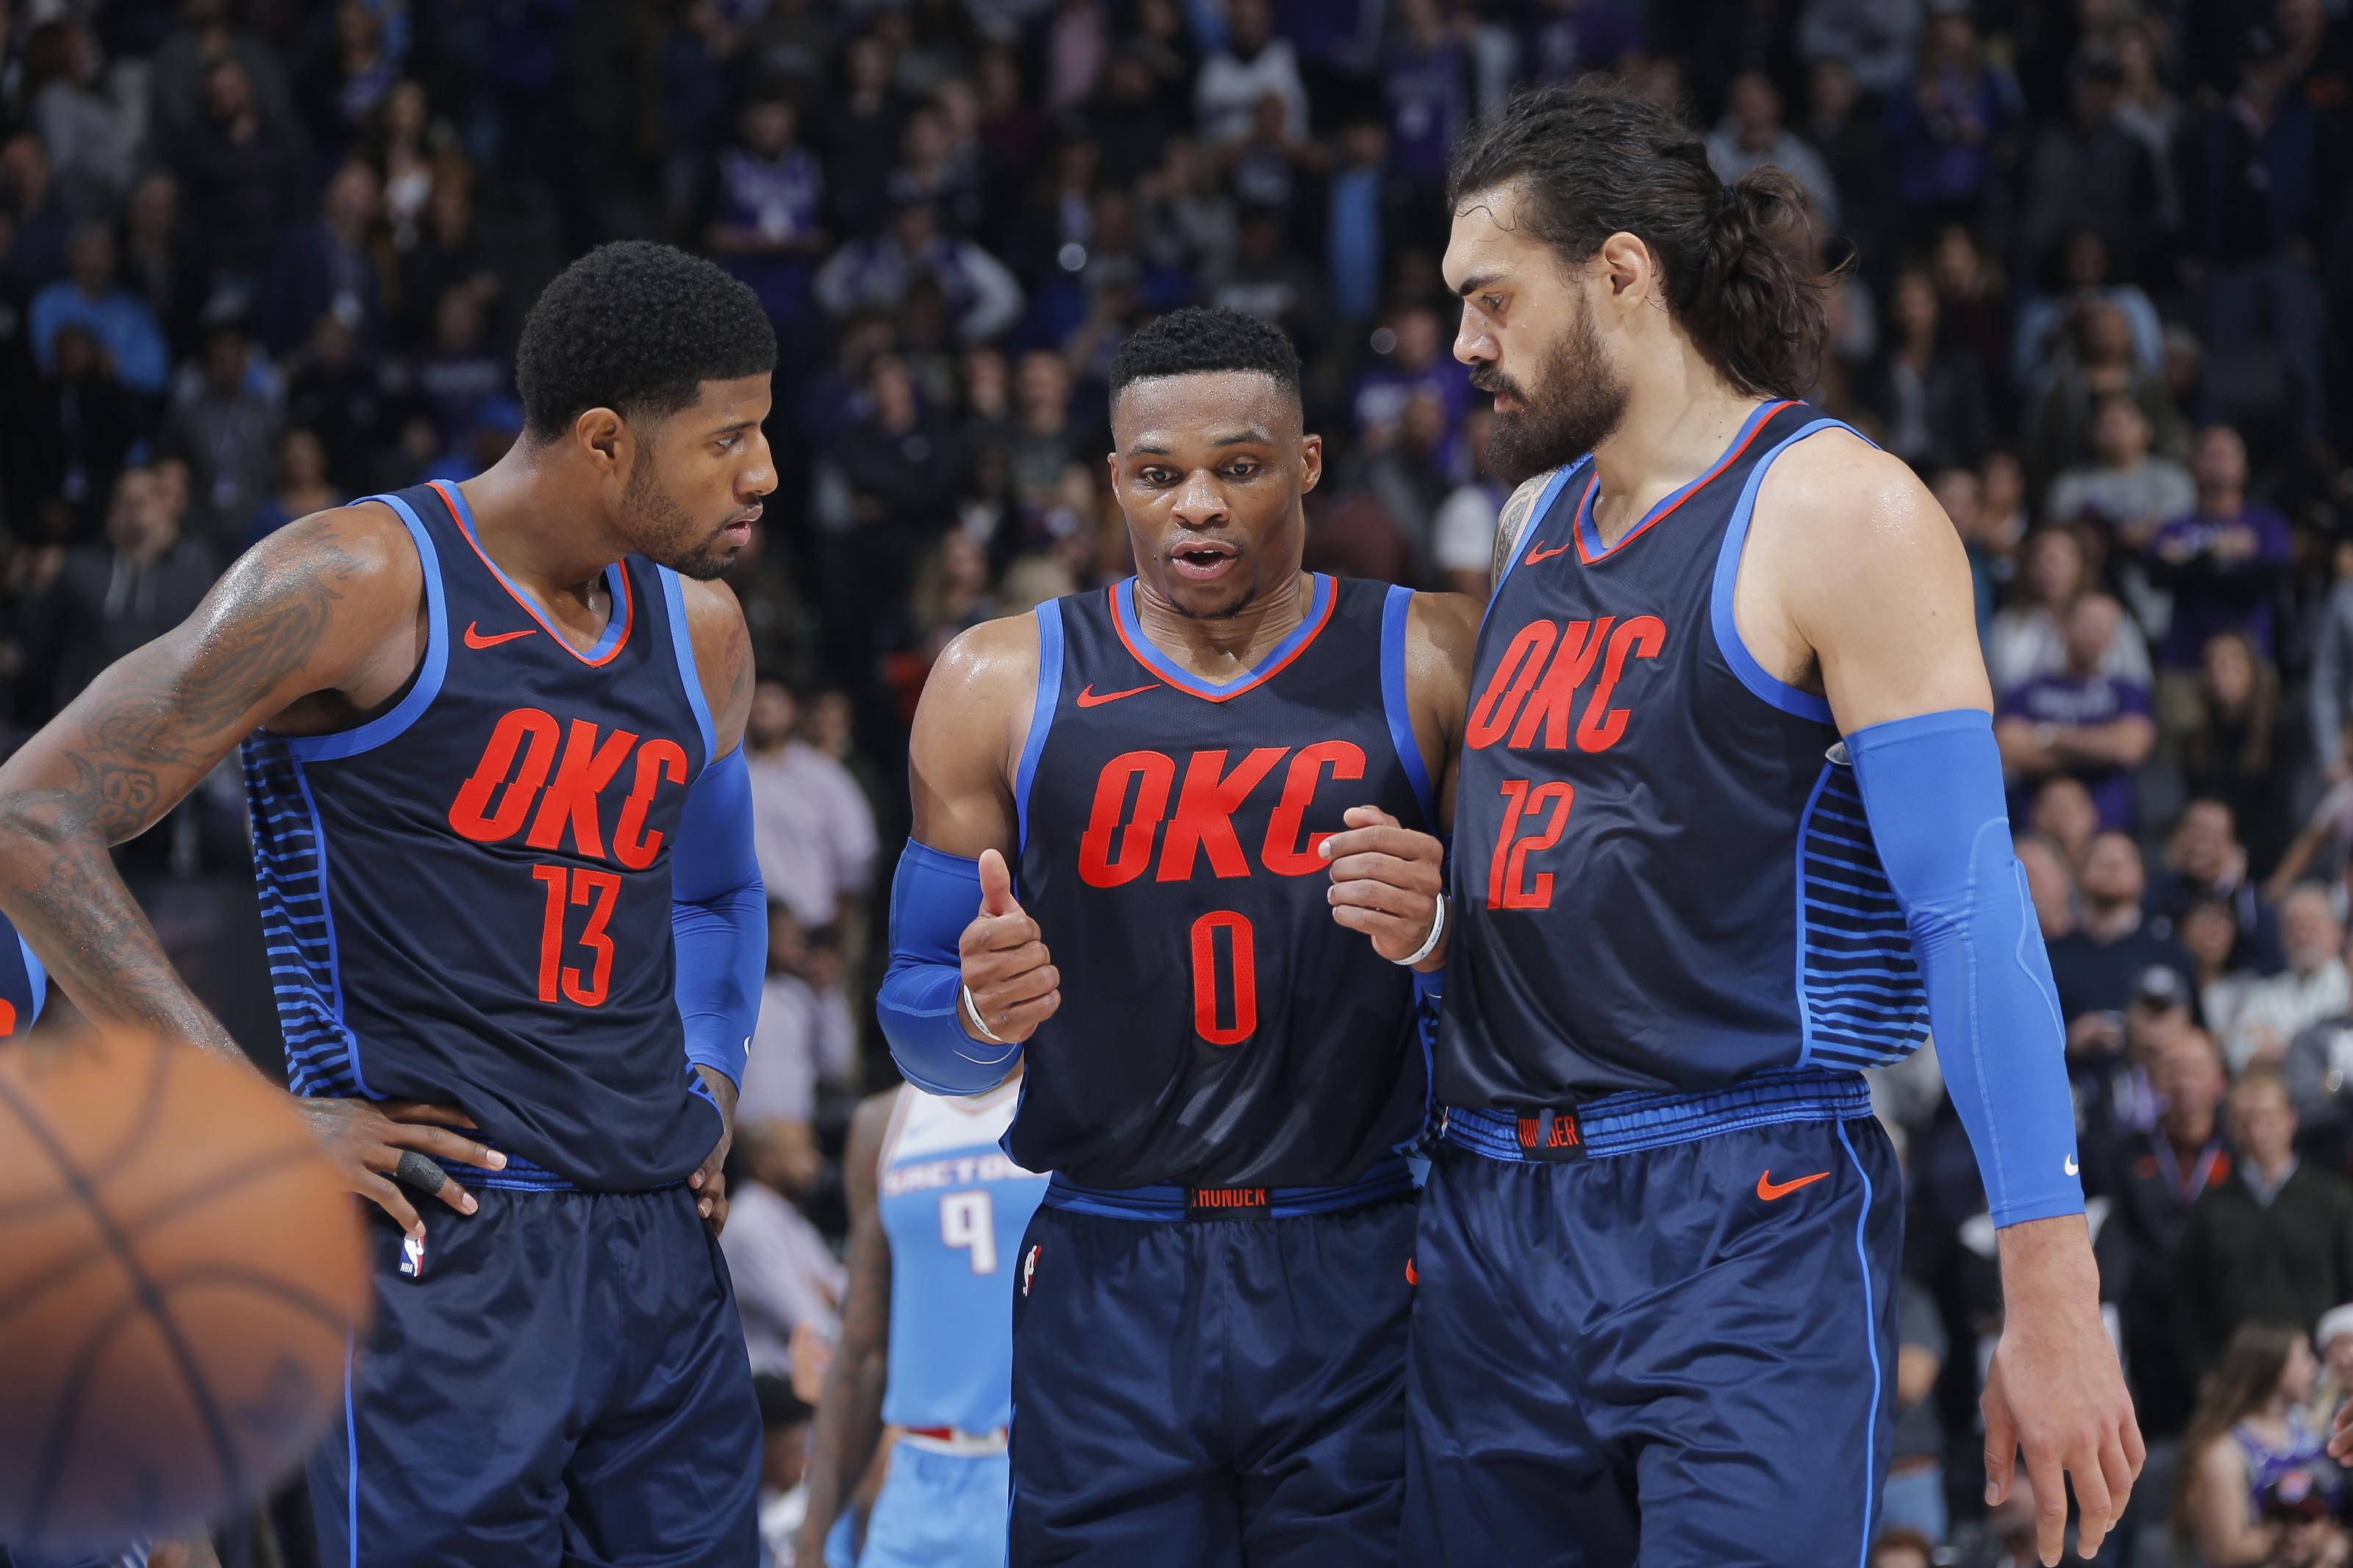 NBA All-Star Game will have an Oklahoma flavor for a long time